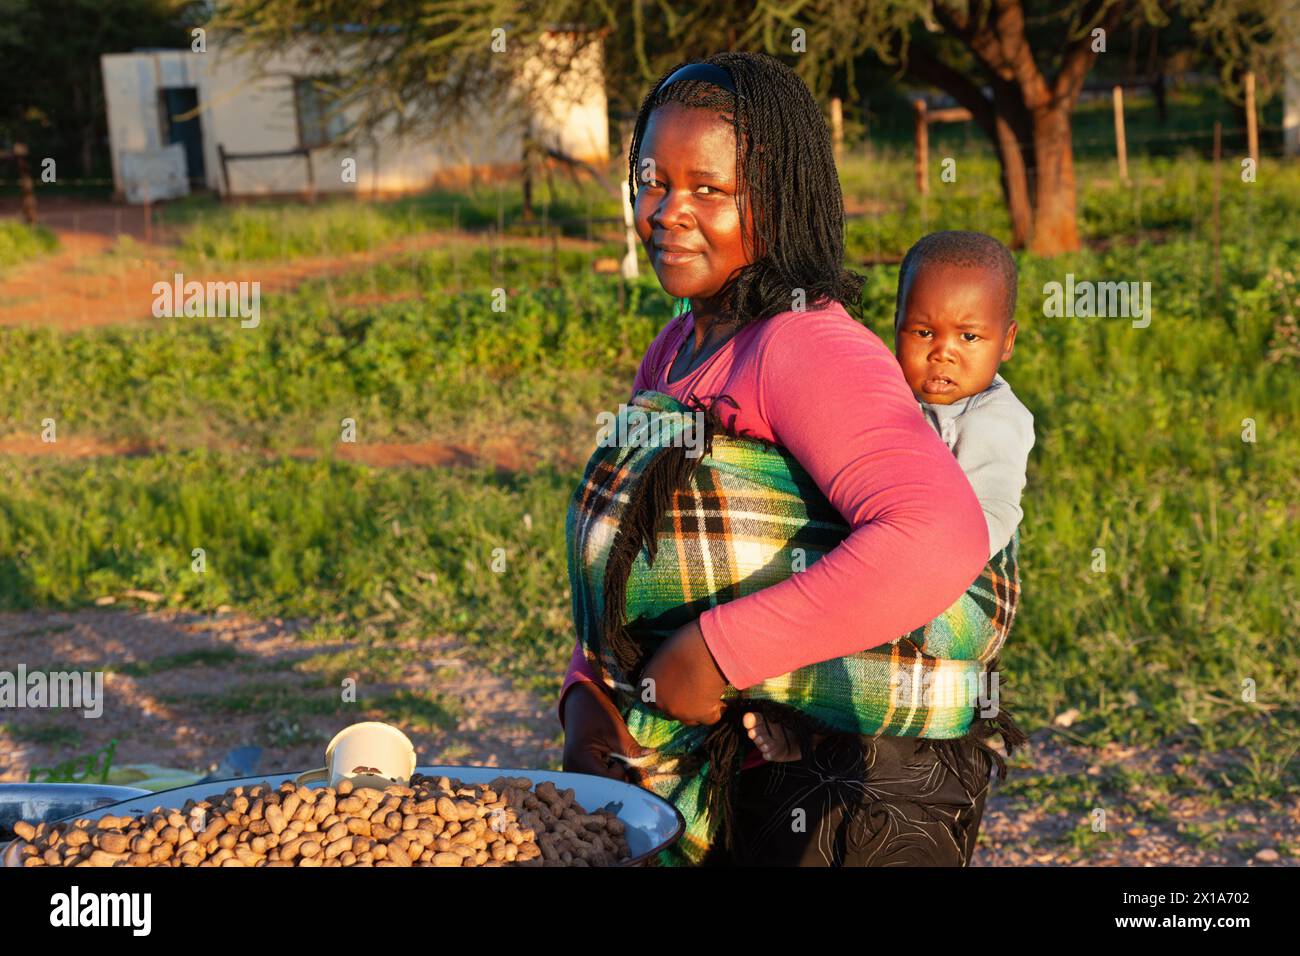 young village street vendor african woman with braids holding her baby in the back Stock Photo